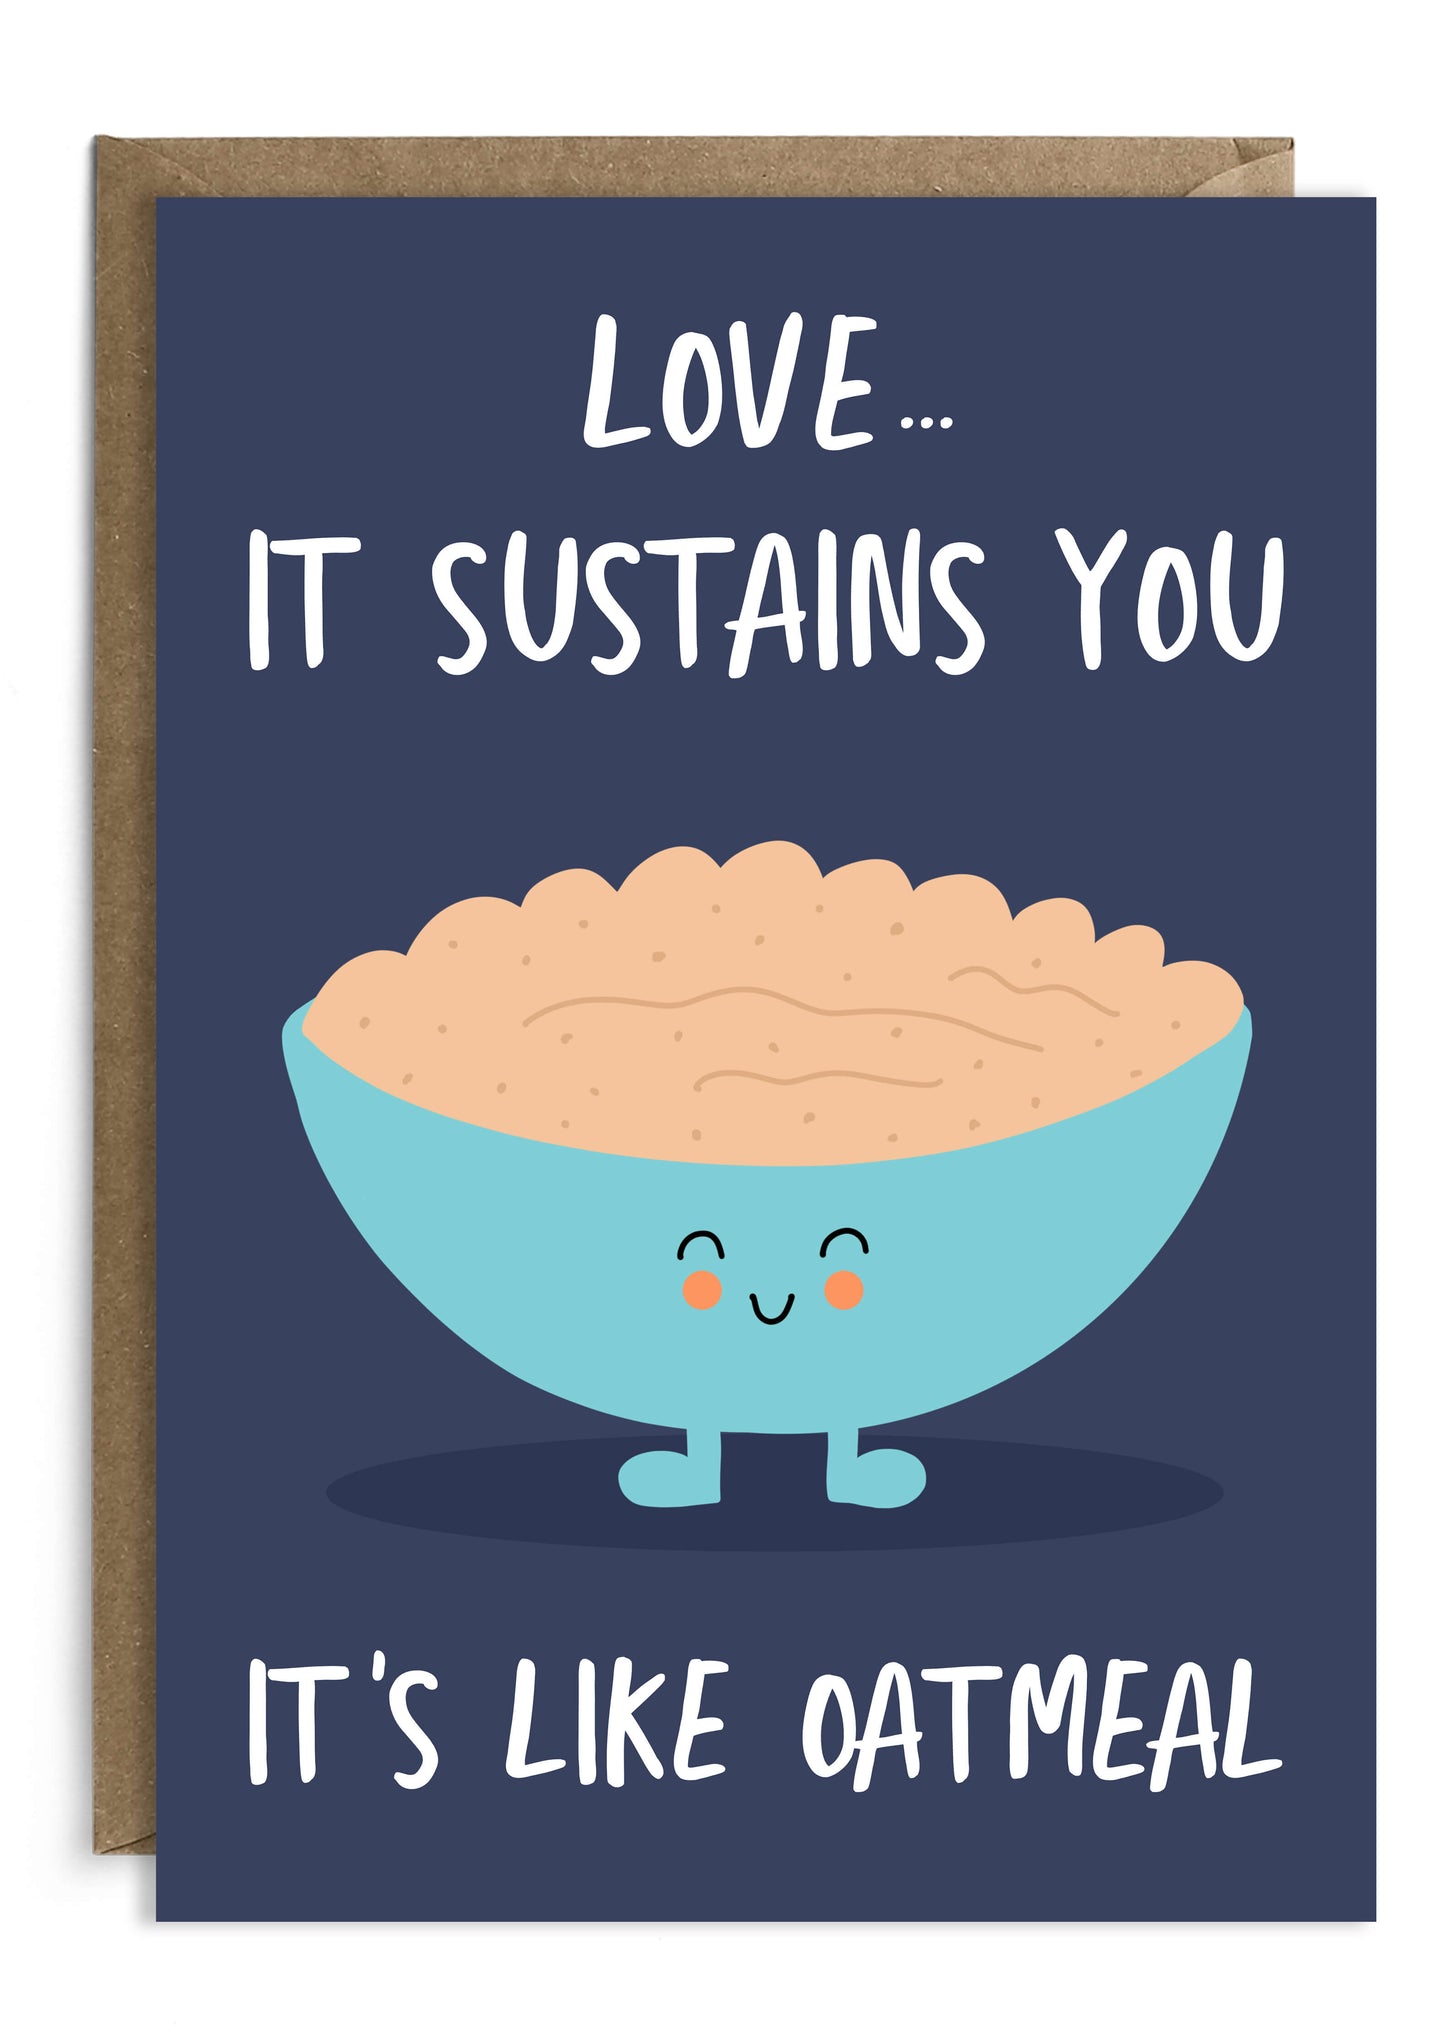 Love sustains you like oatmeal. Funny anniversary love card inspired by Brooklyn 99